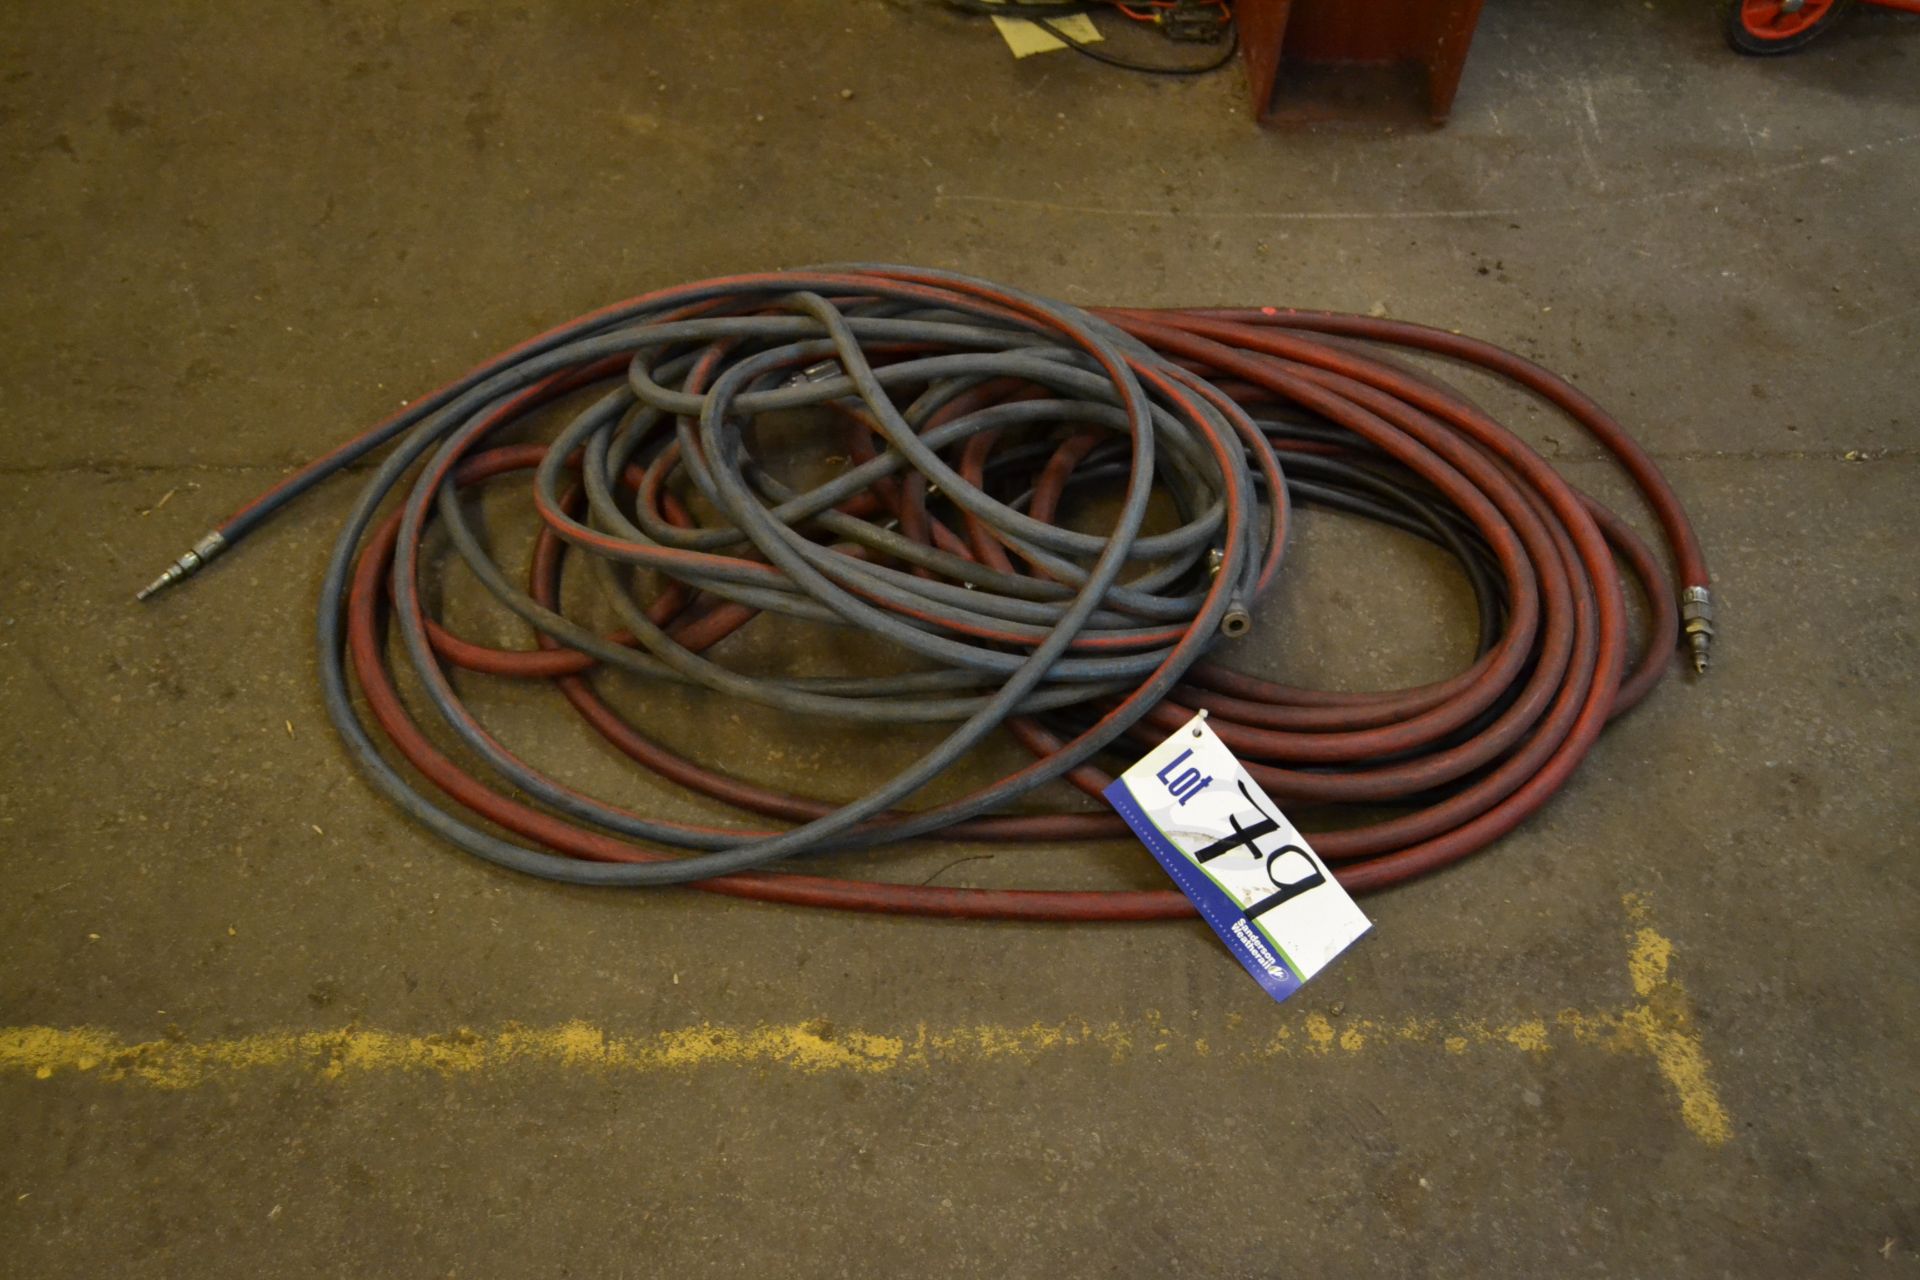 Compressed Air Hoses, as set out